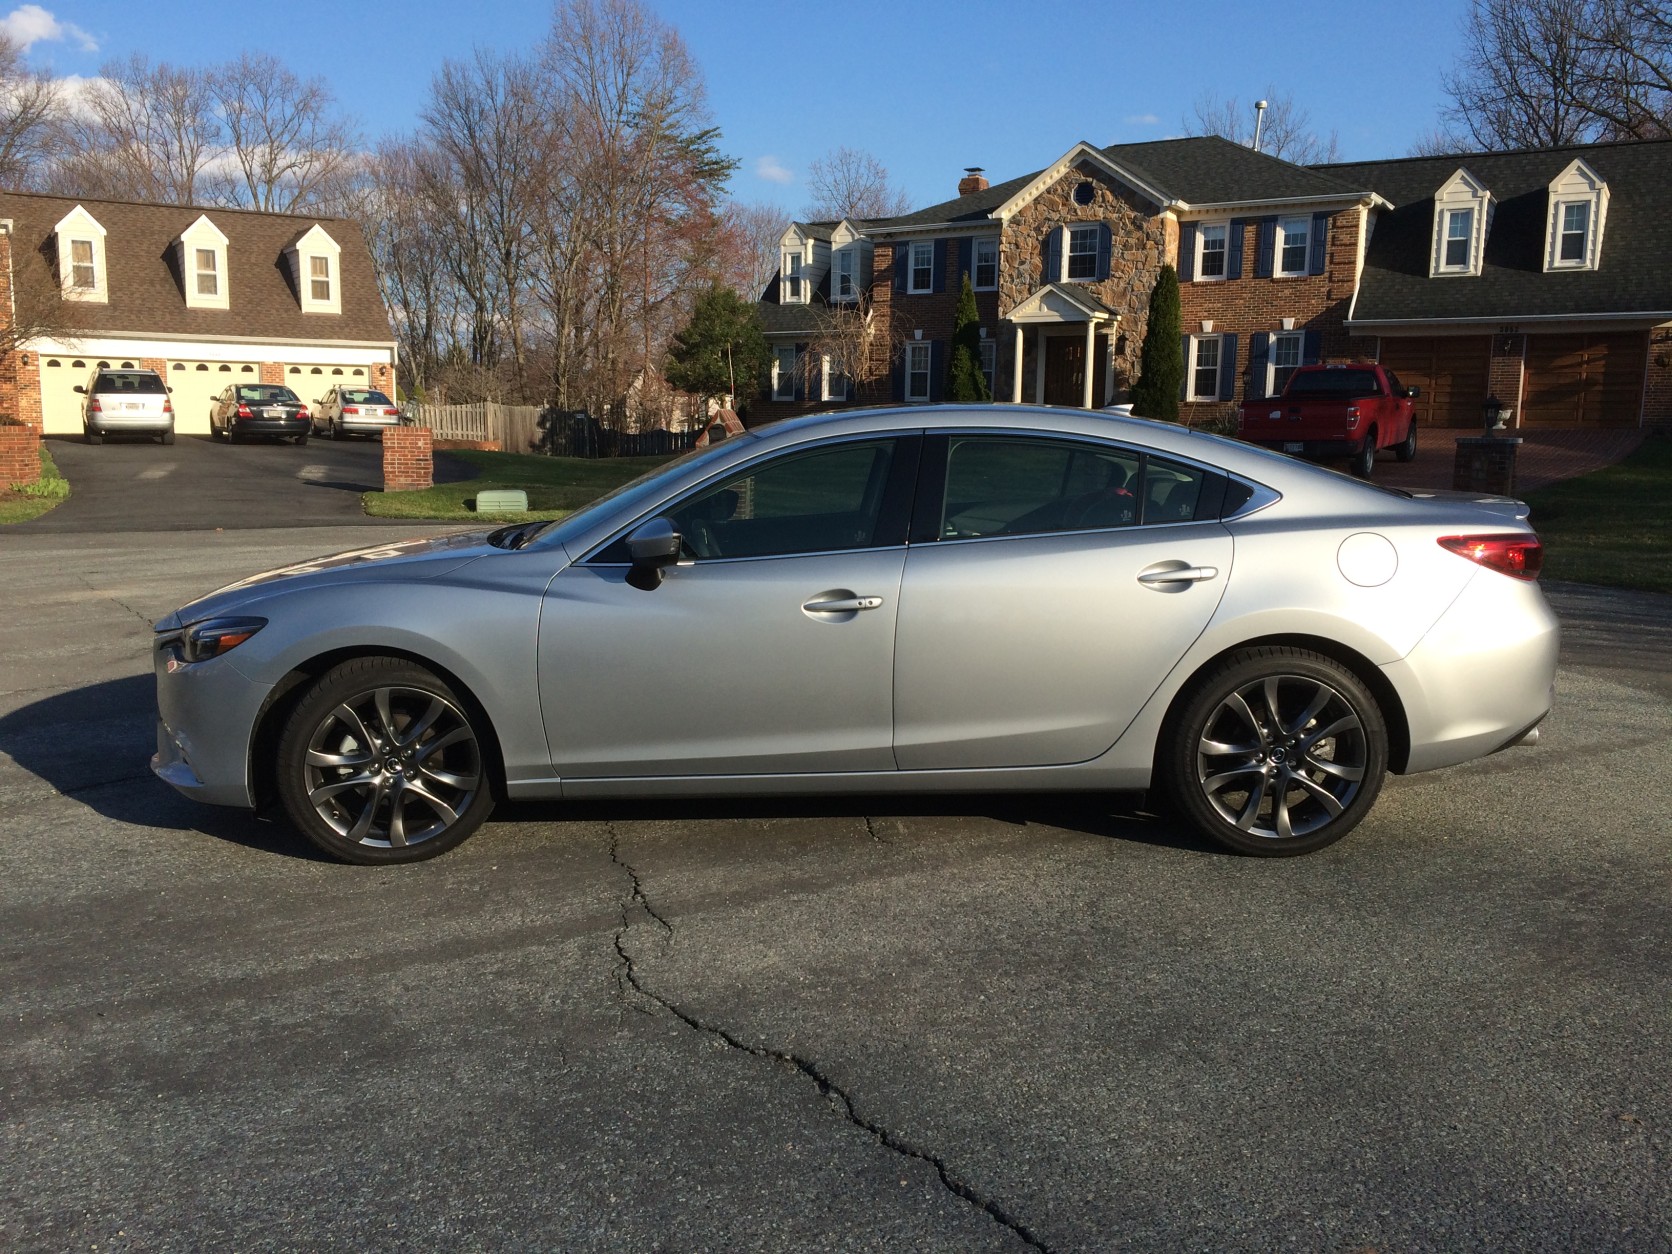 The Mazda 6 has swooping lines and a more coupe-like profile. (WTOP/Mike Parris) 